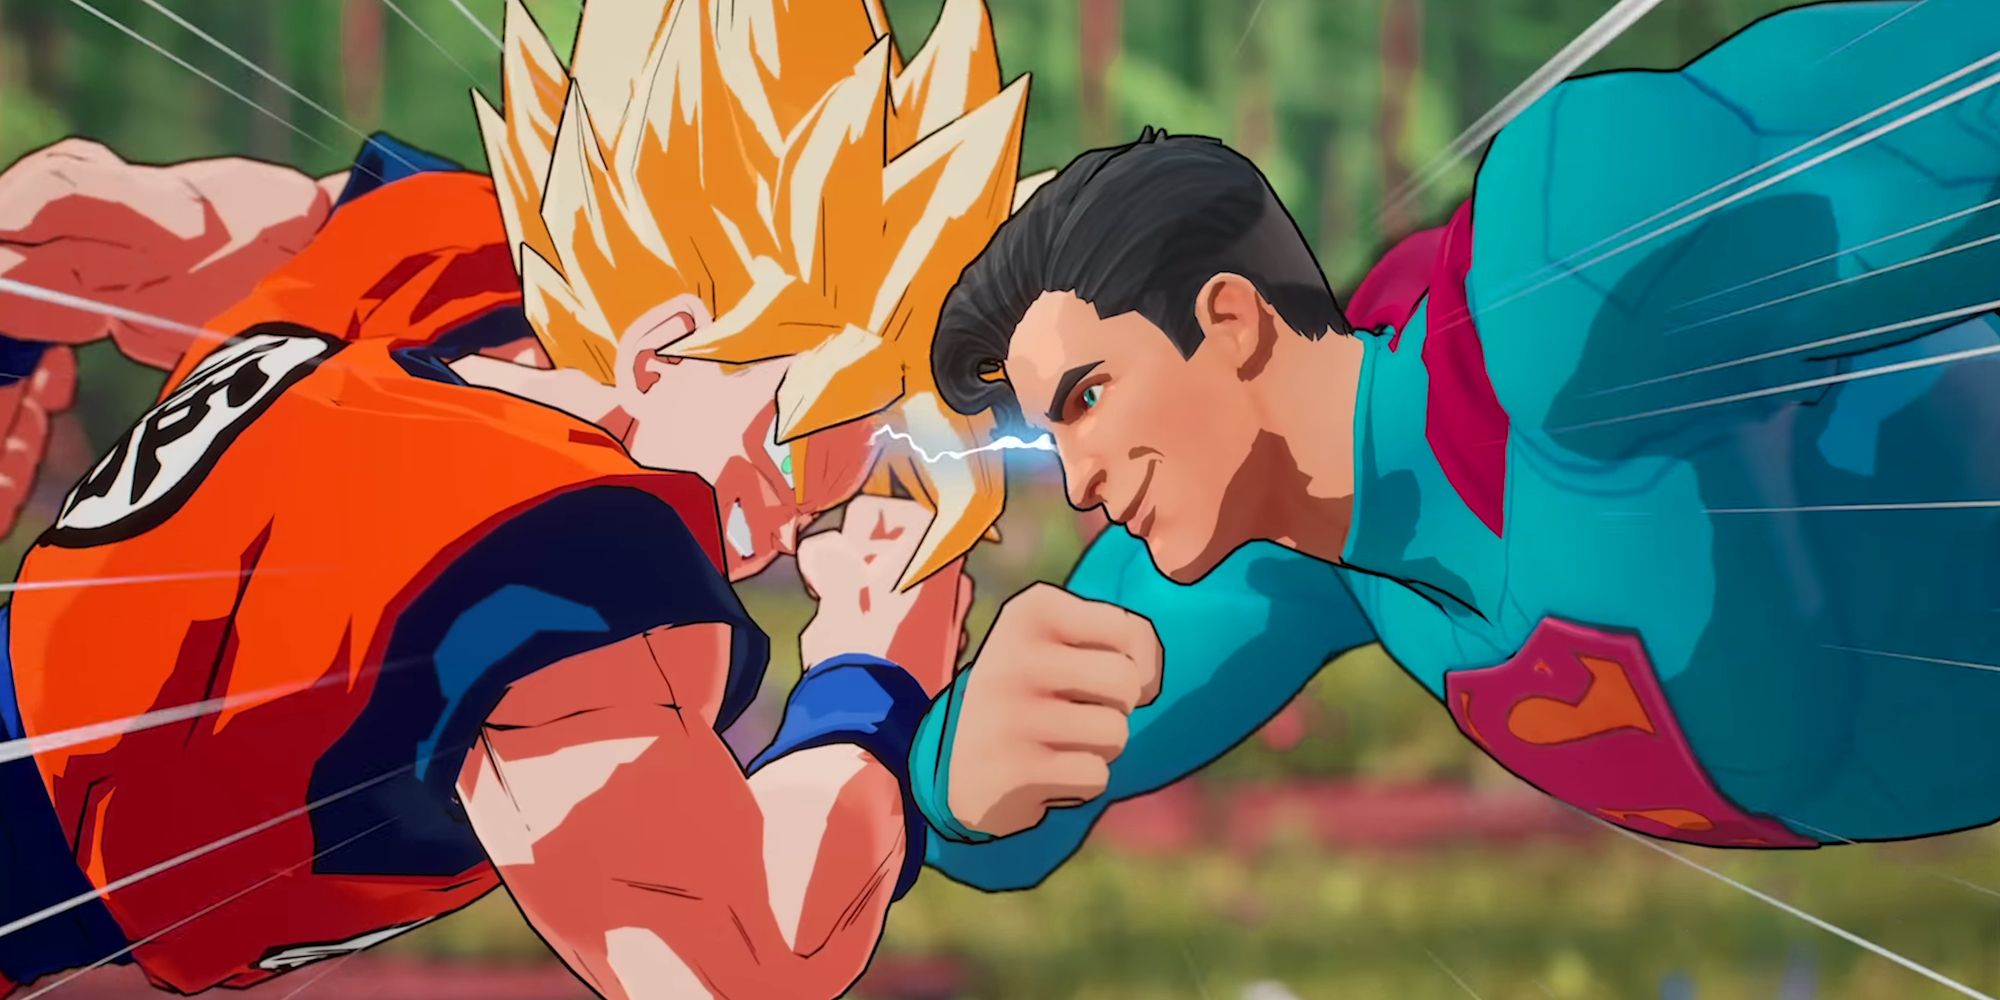 More Than Strength – The Real Reason Goku is Anime’s Most Iconic Hero is What Separates Him From Superman